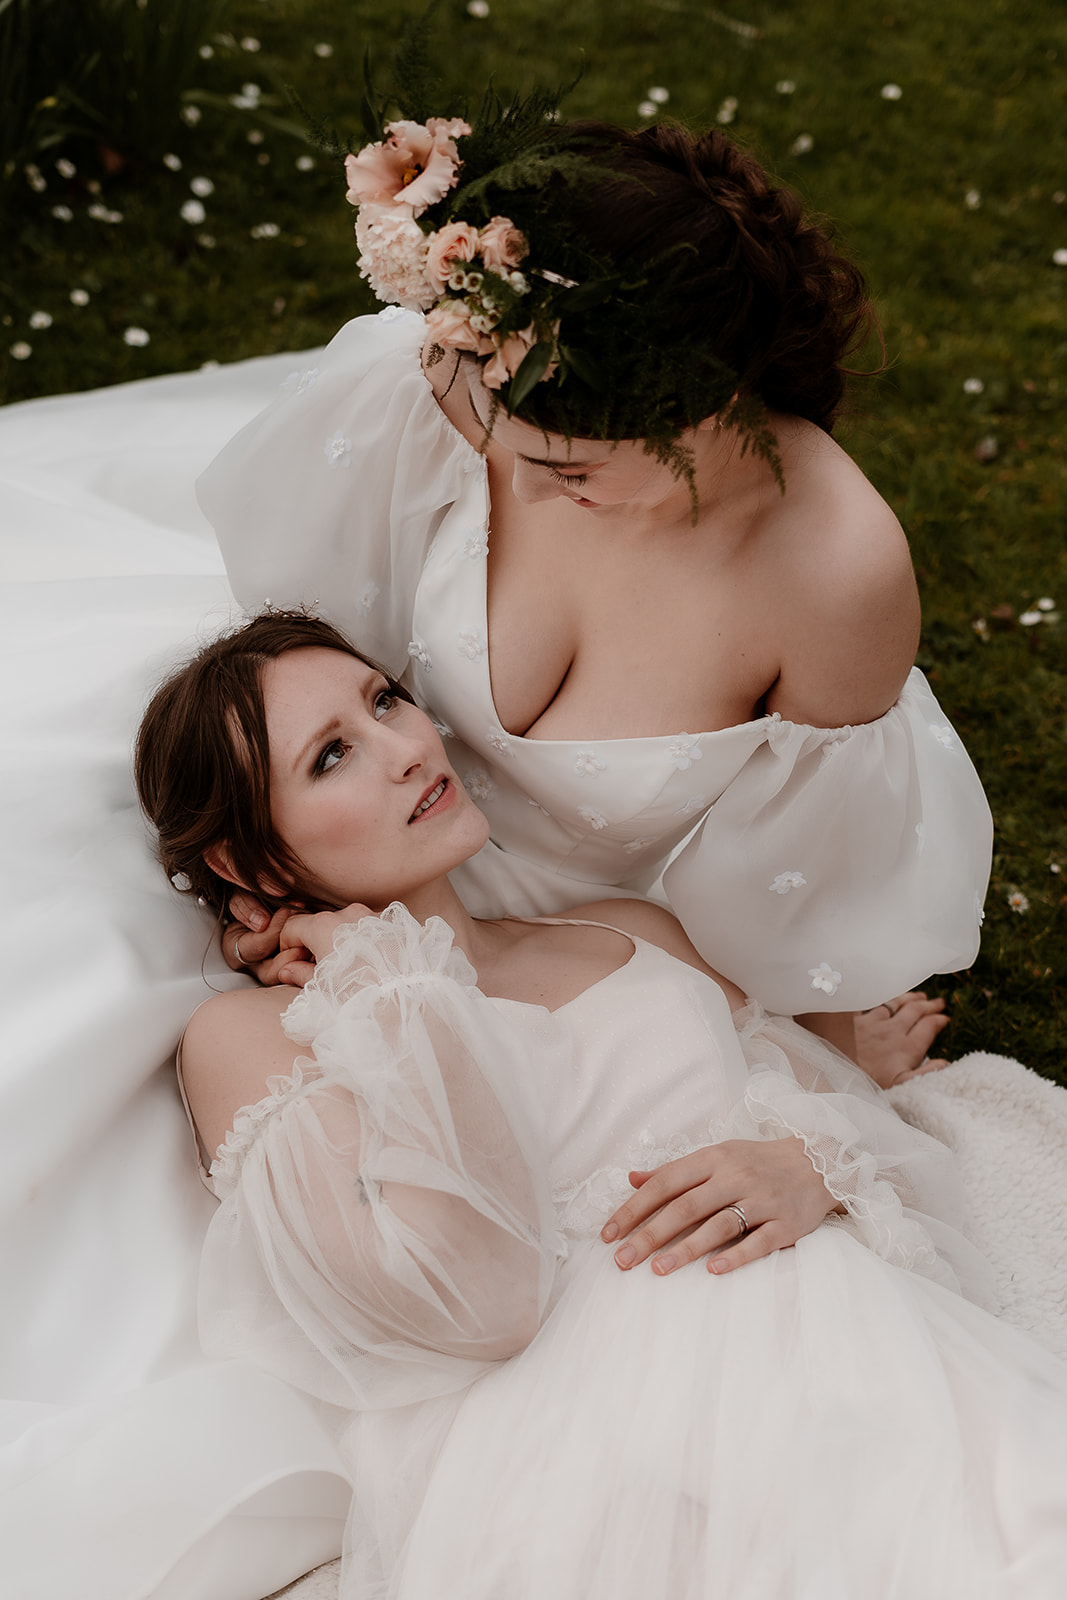 two brides sit and snuggle together on the grounds of Mapledurham House wedding venue in the spring sunshine